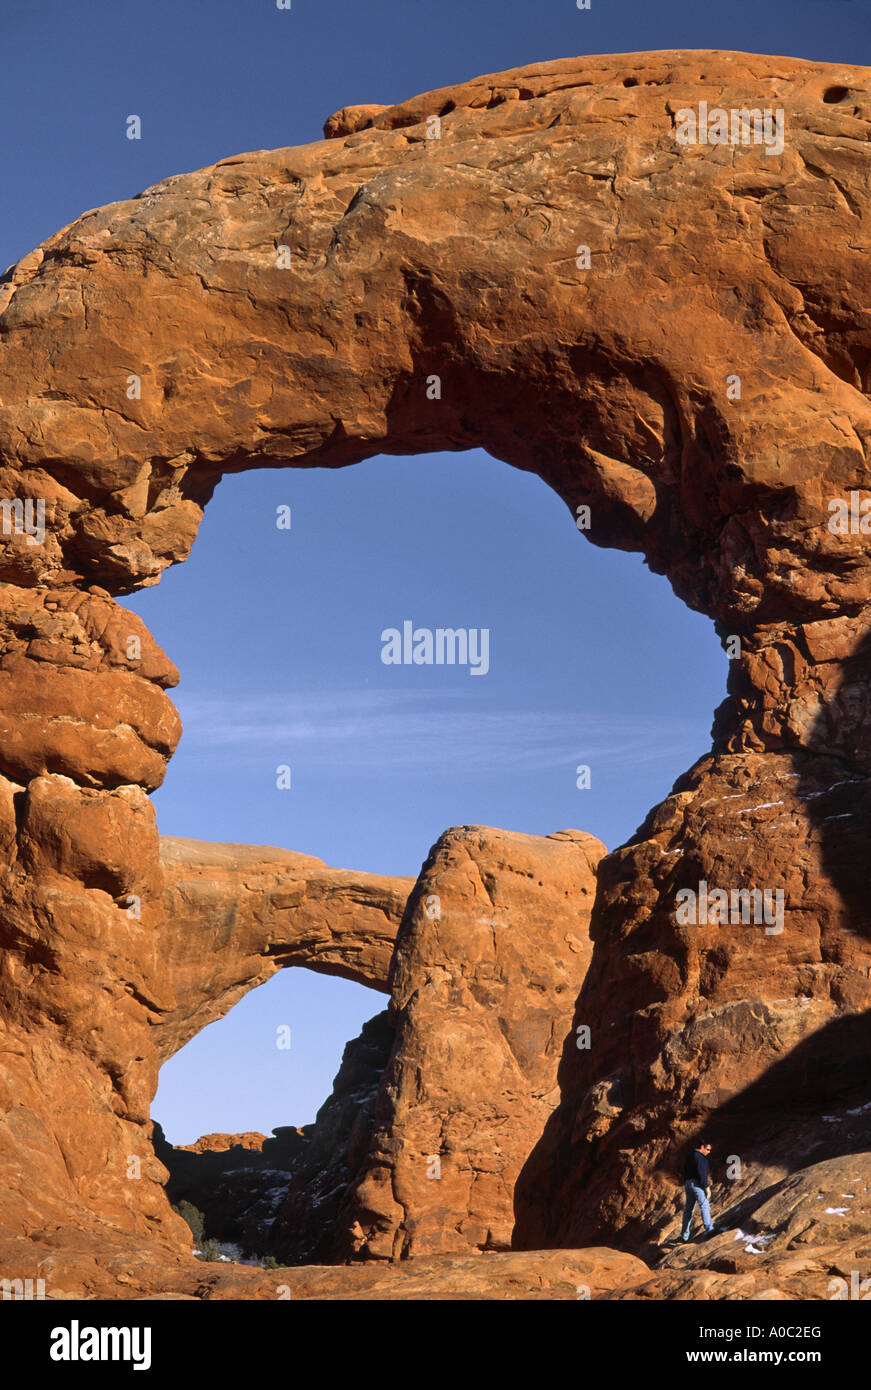 Turret Arch, South Window in dist, winter, Arches Nat Park, Utah, USA Stock Photo